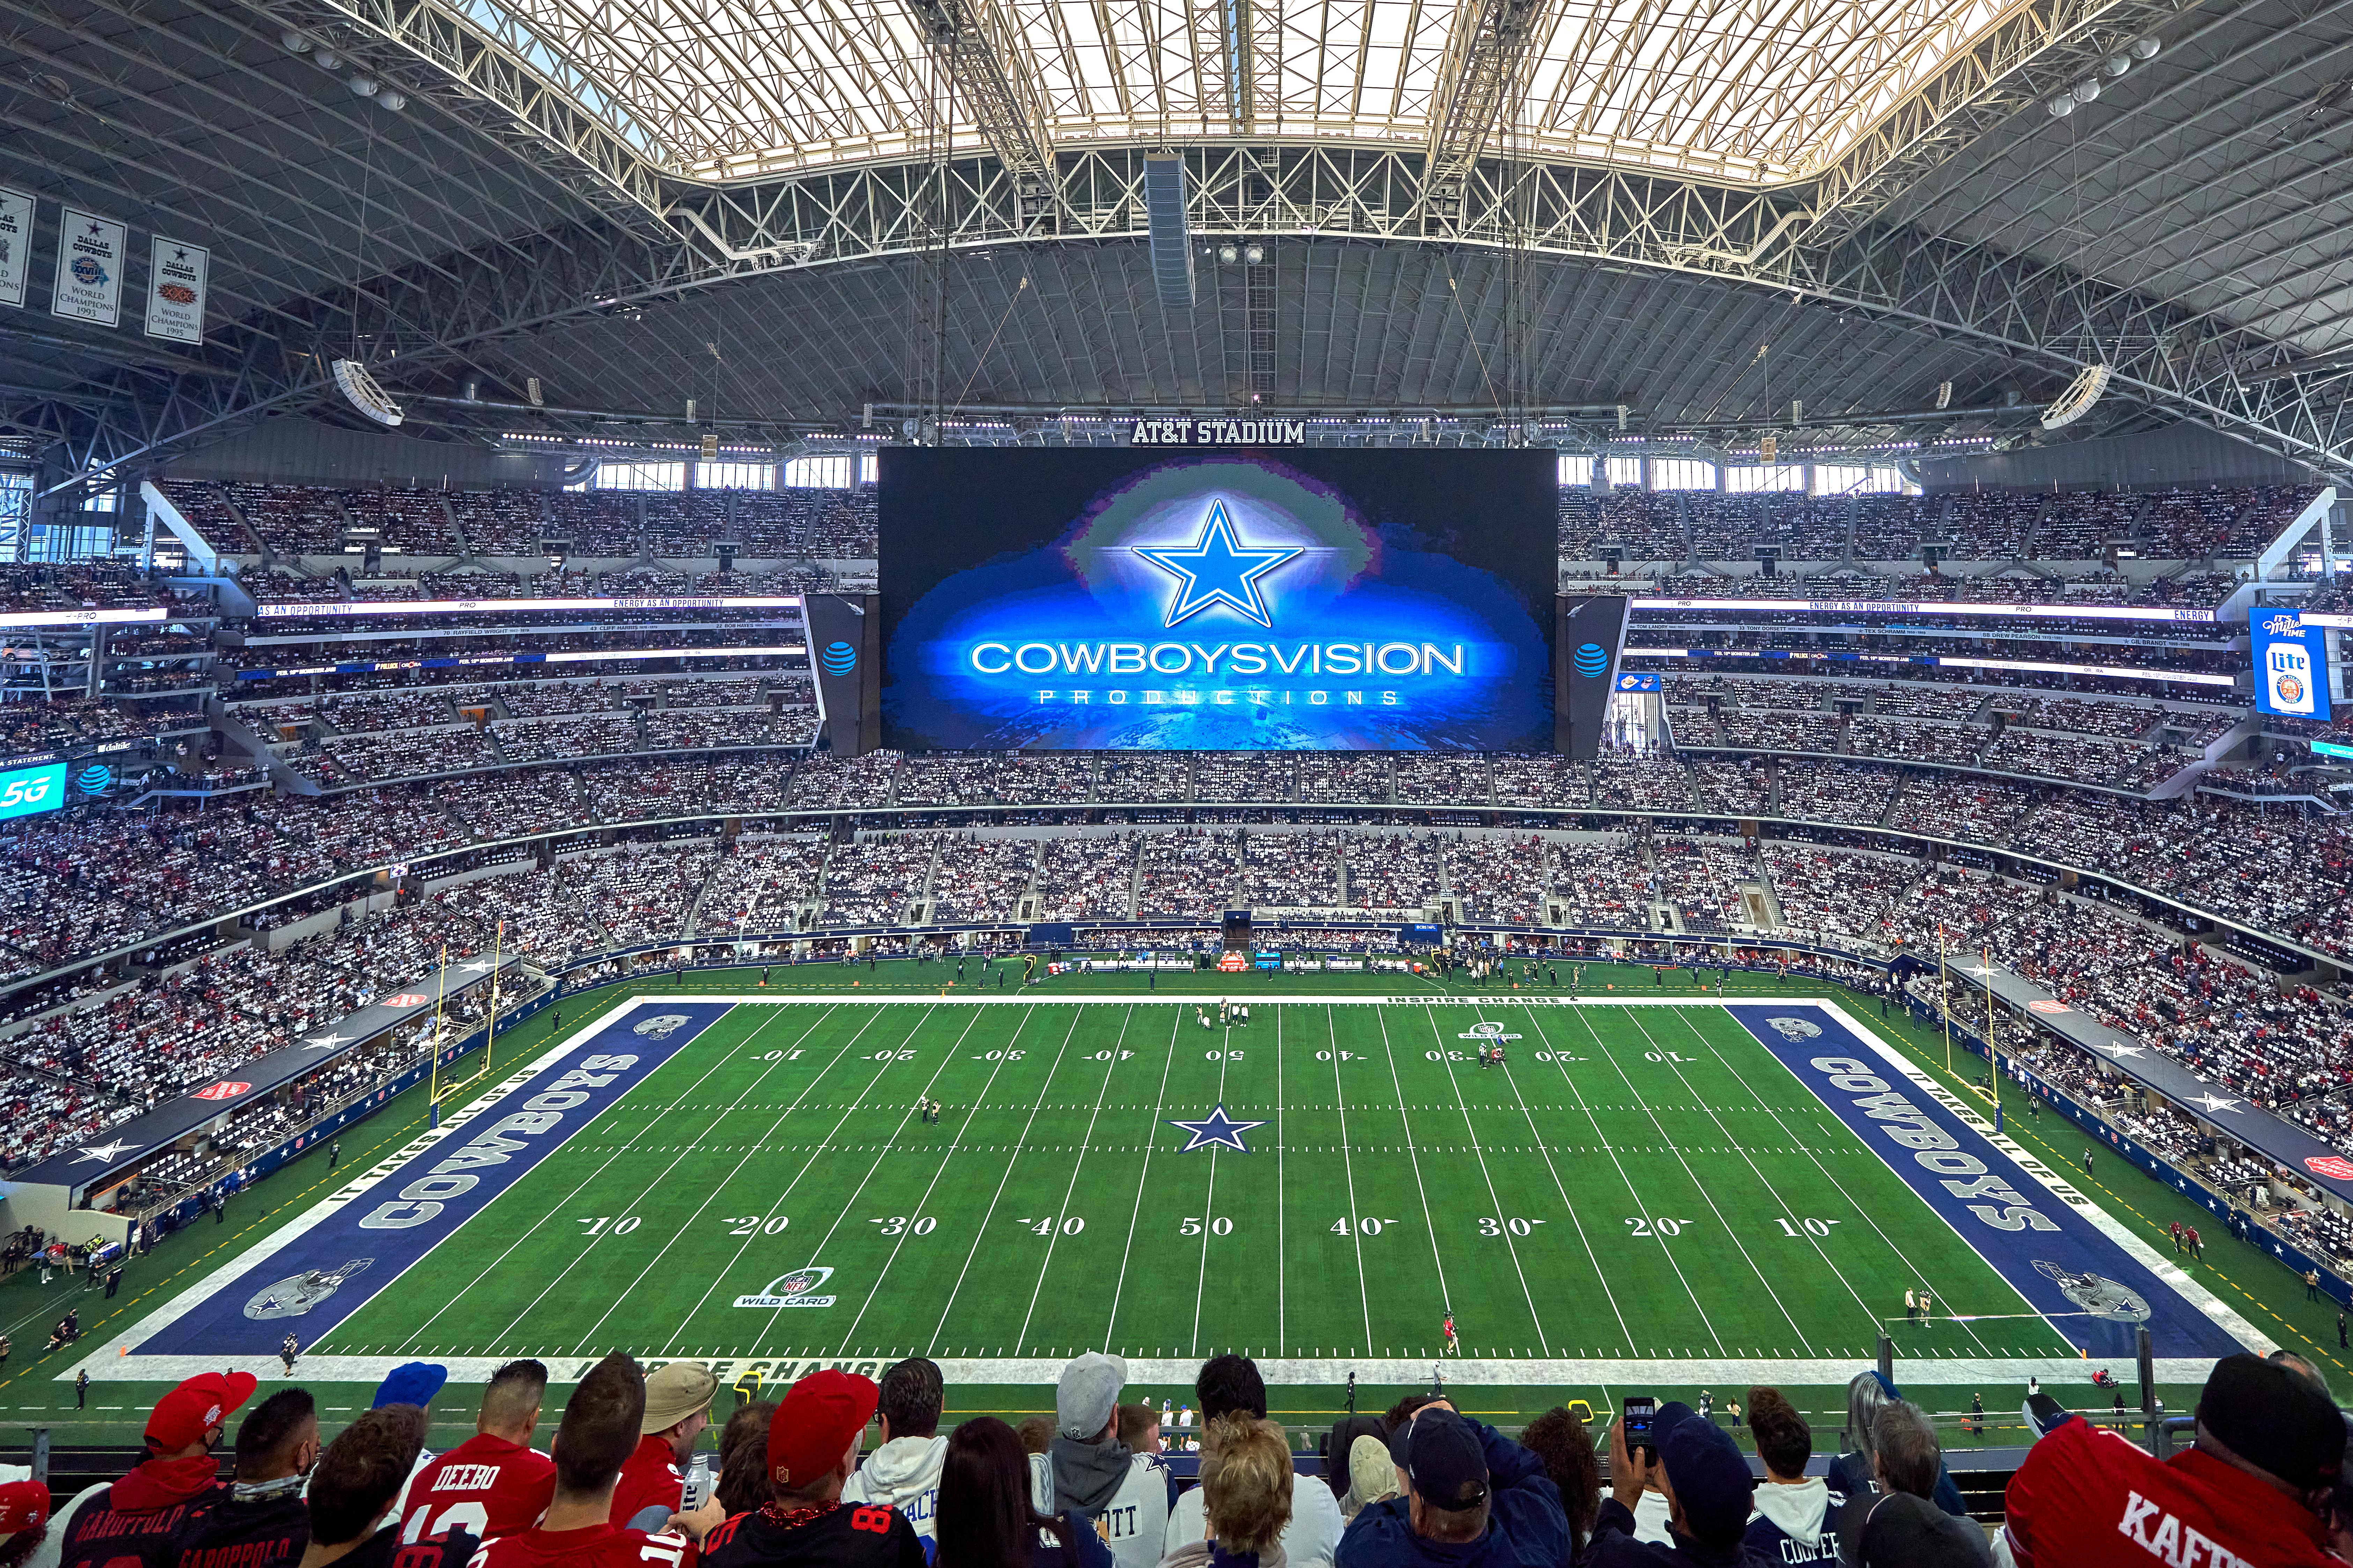 Jake Paul and Mike Tyson fight in the 80,000-seat AT&T Stadium in Texas